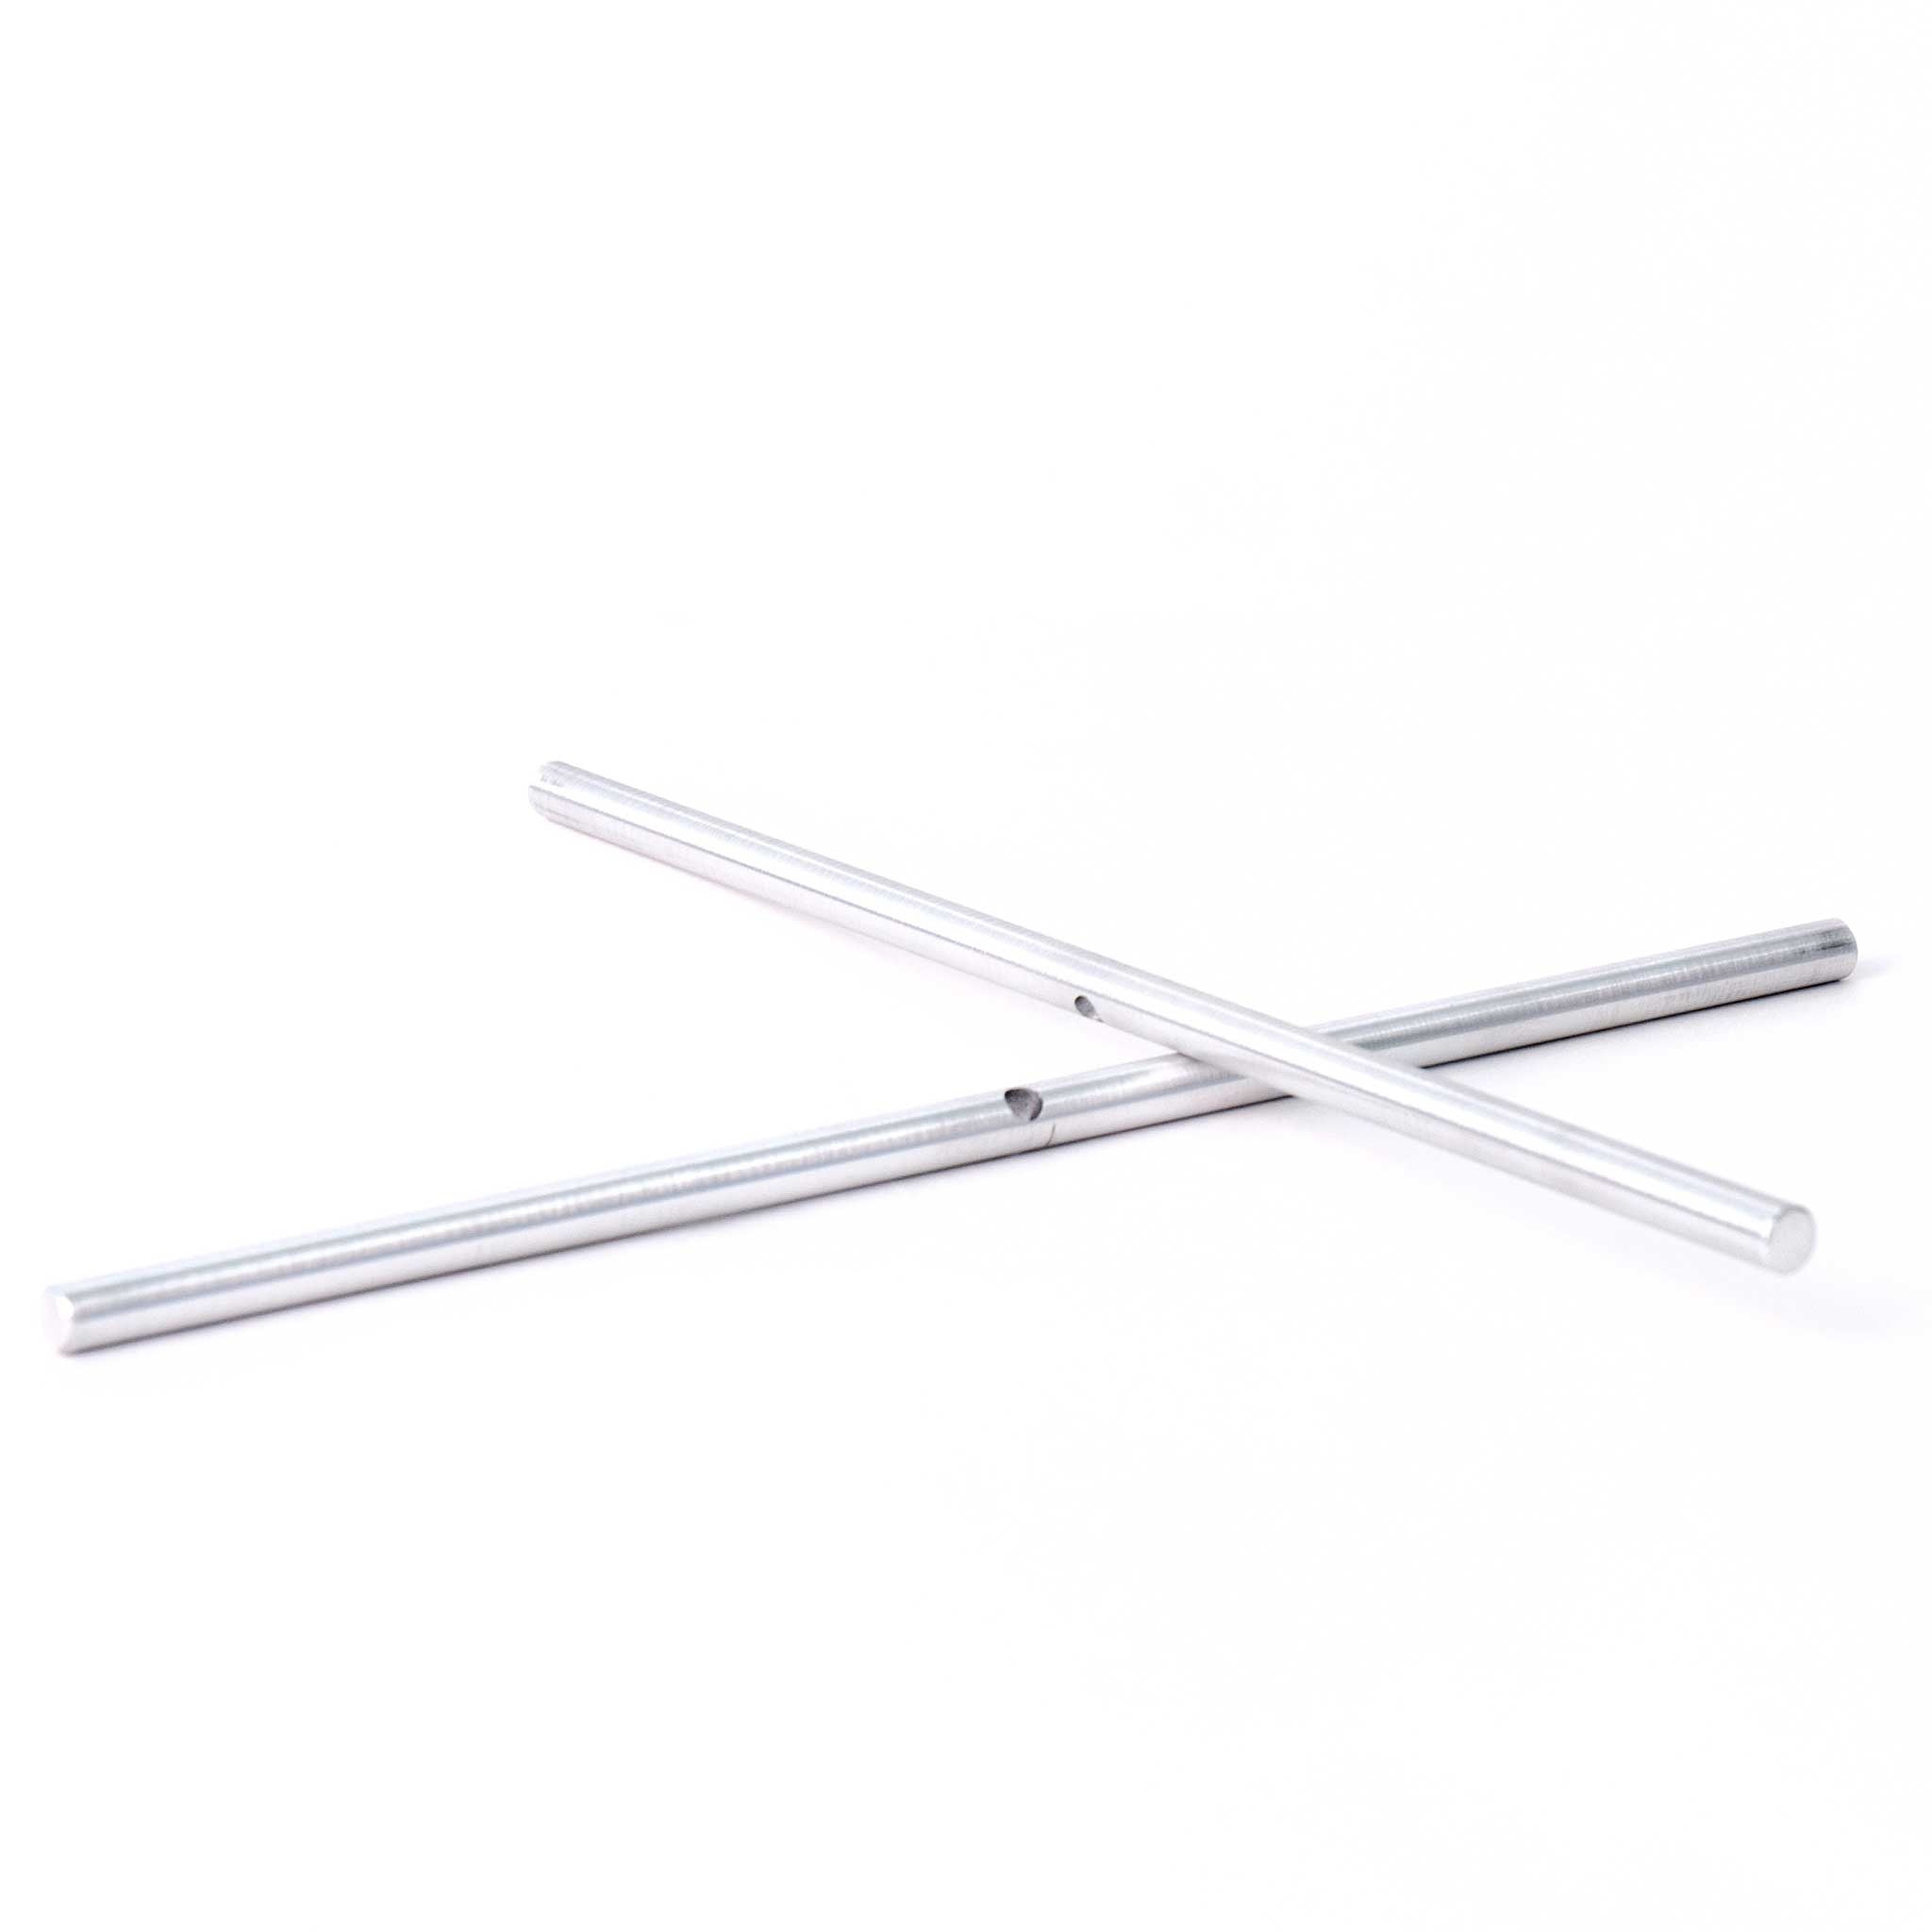 Replacement Set of 2 Aluminum Poles for Egg Bird Feeders